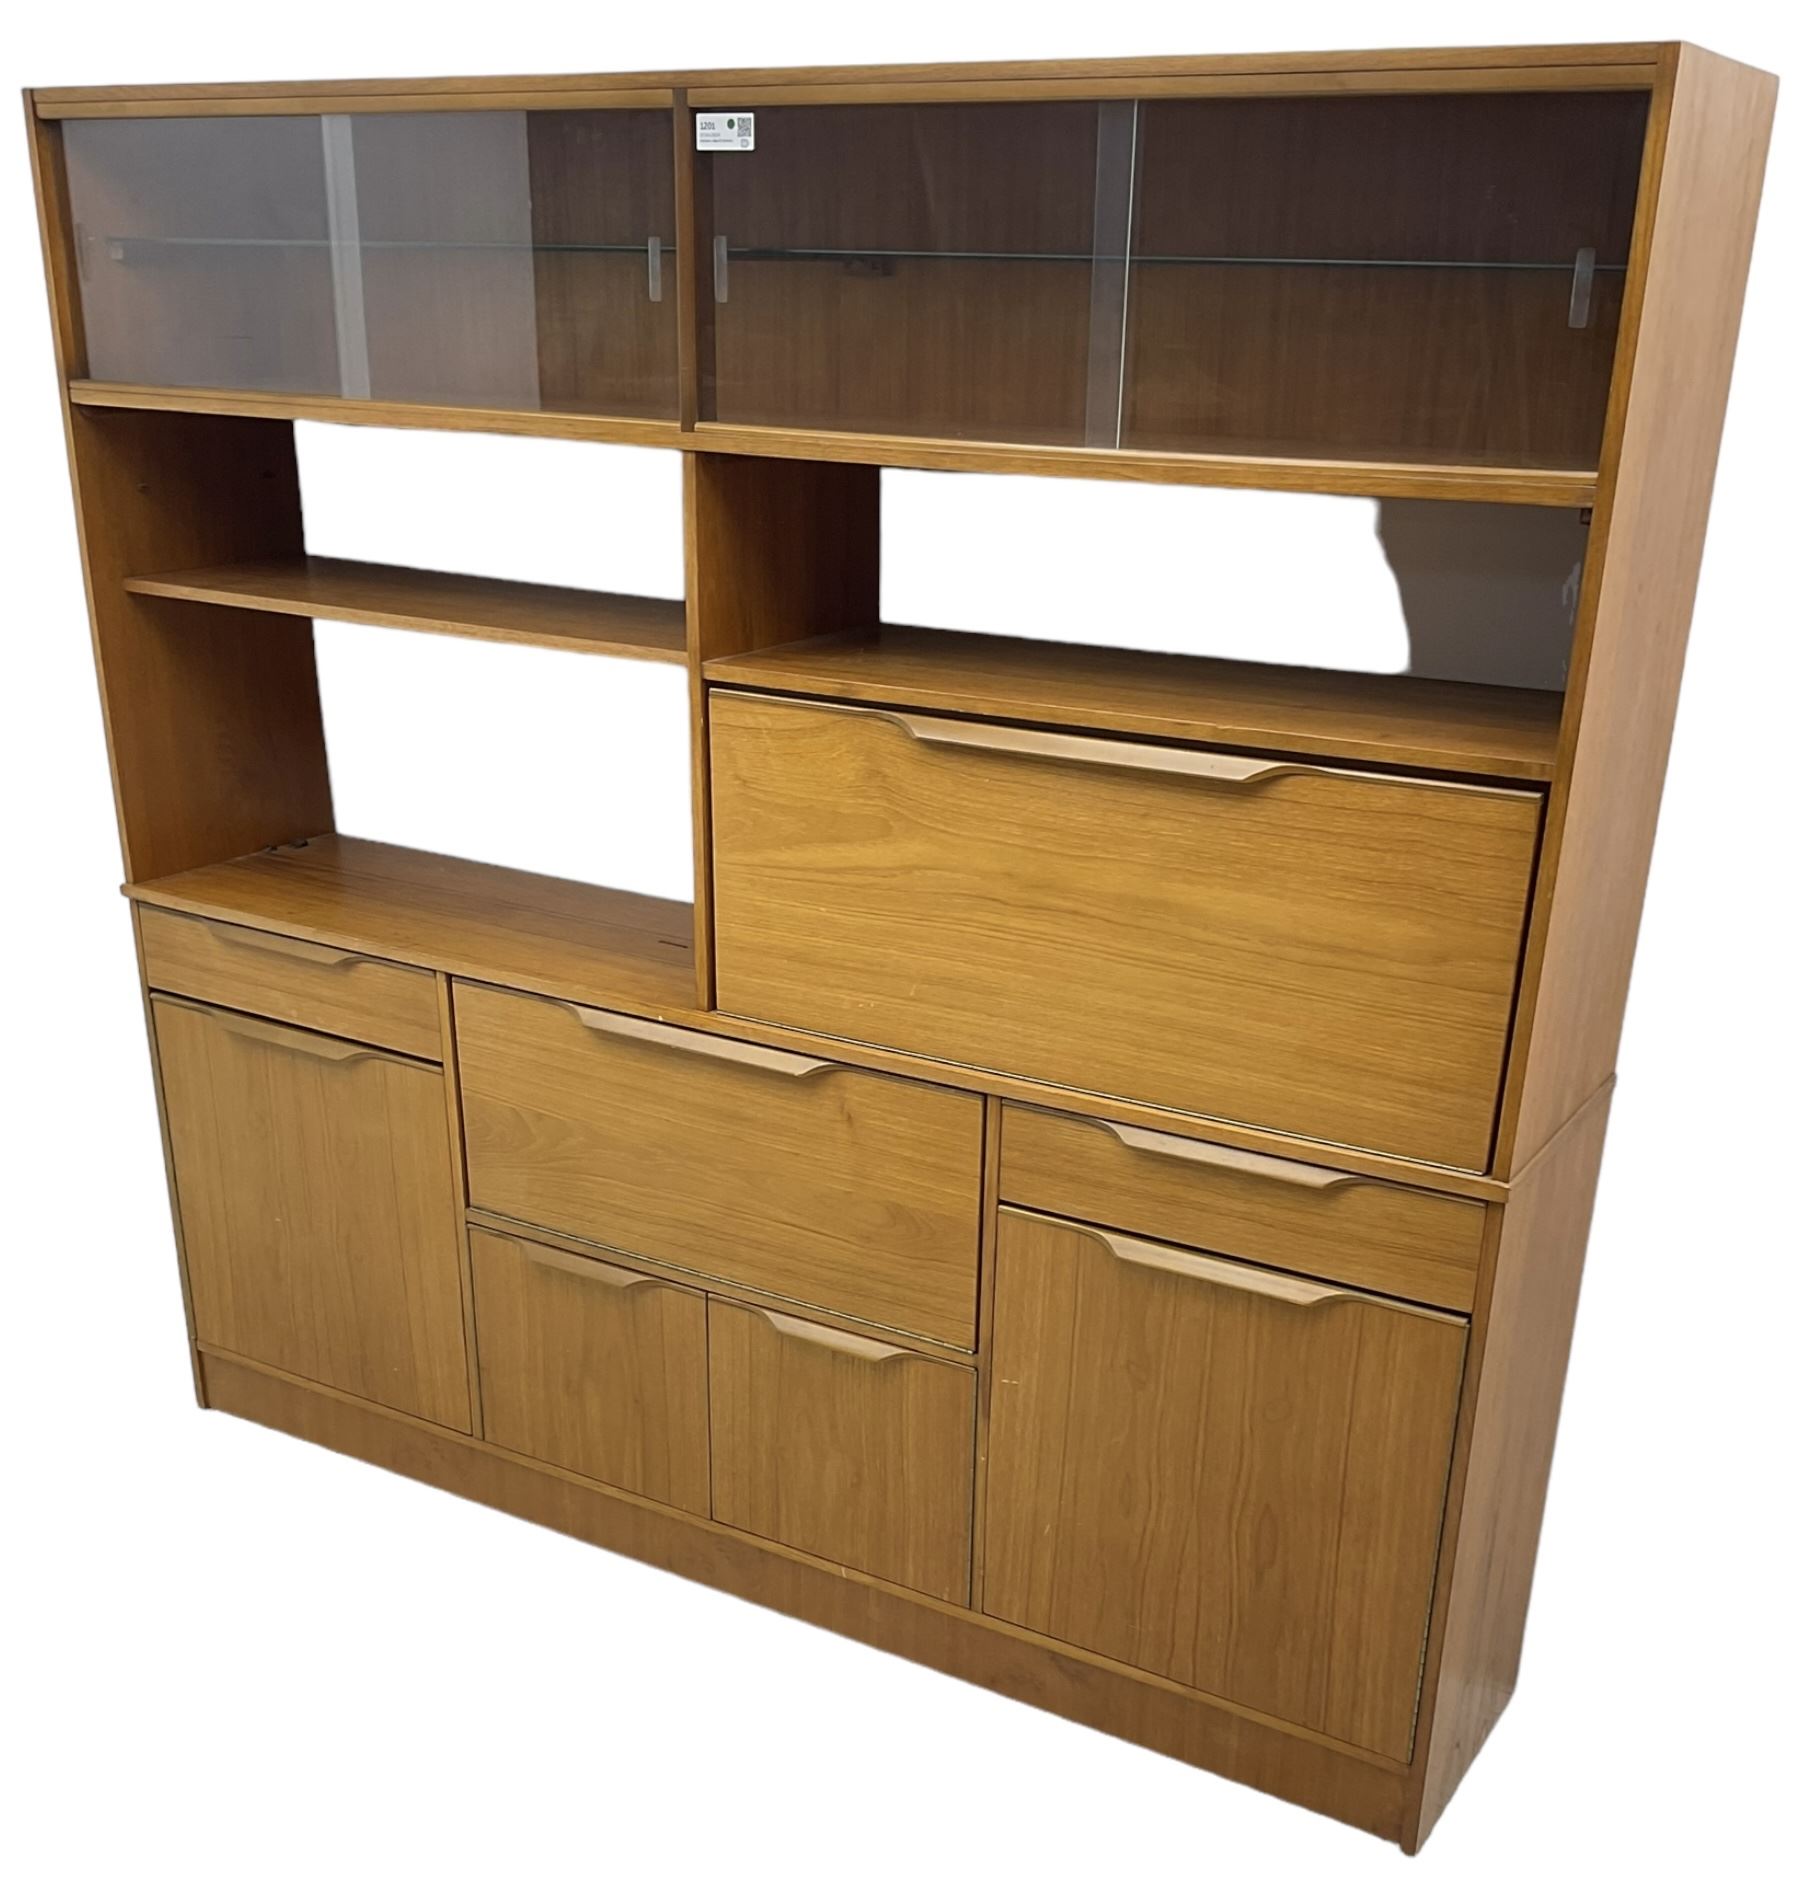 Mid-20th century teak sectional wall unit - Image 5 of 6